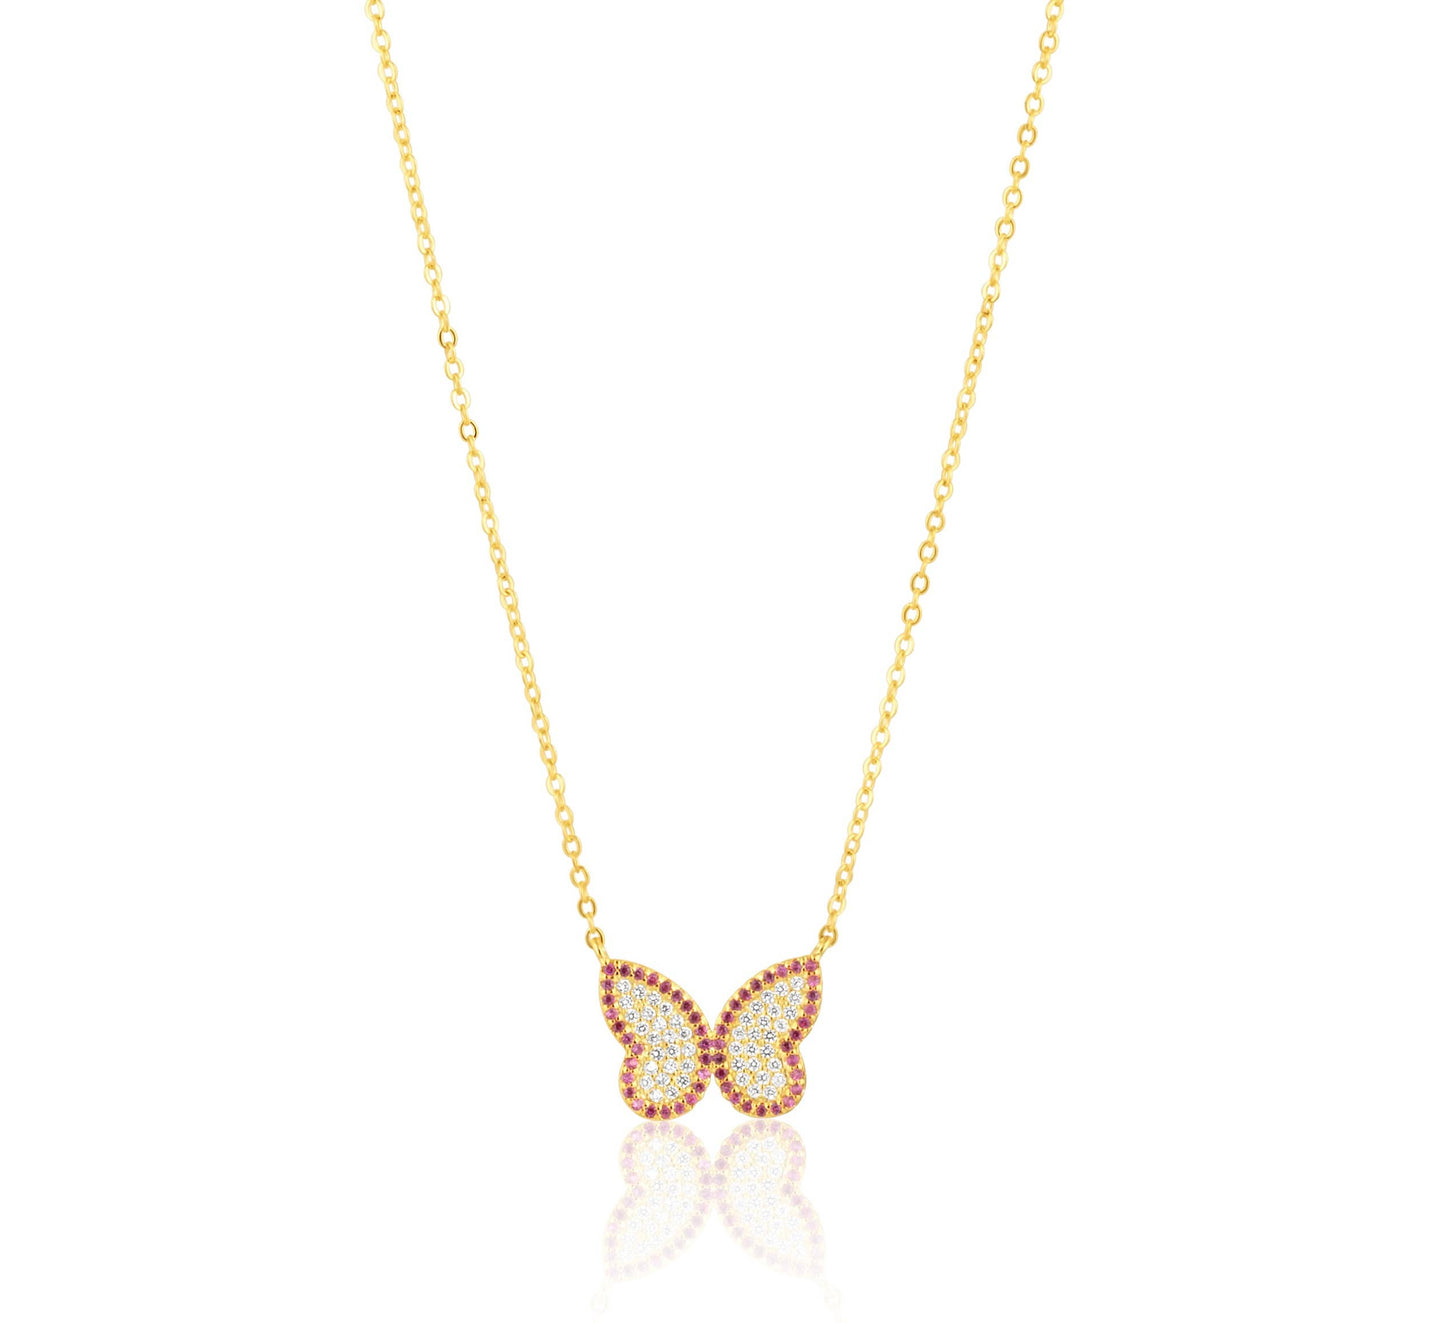 Sahira Jewelry Design - Mariah Butterfly Necklace